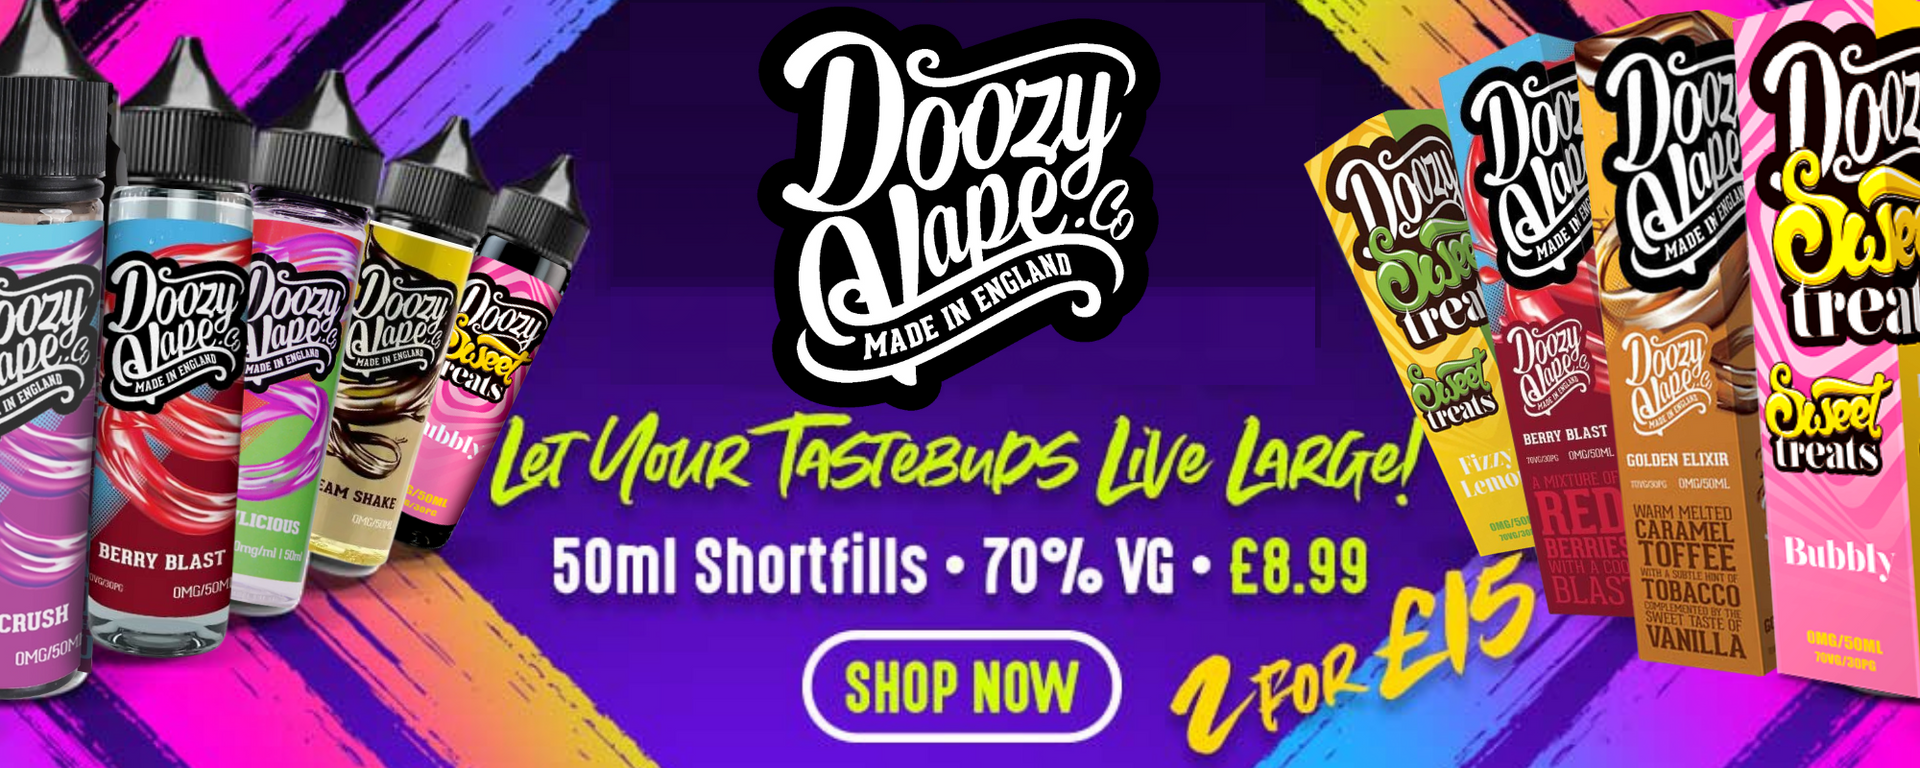 Buy Doozy Vape Co eliquid 50ml shortfills for £8.99 bargain deals and discount sales Special offers on the best vape ejuice lowest prices UK & Europe.